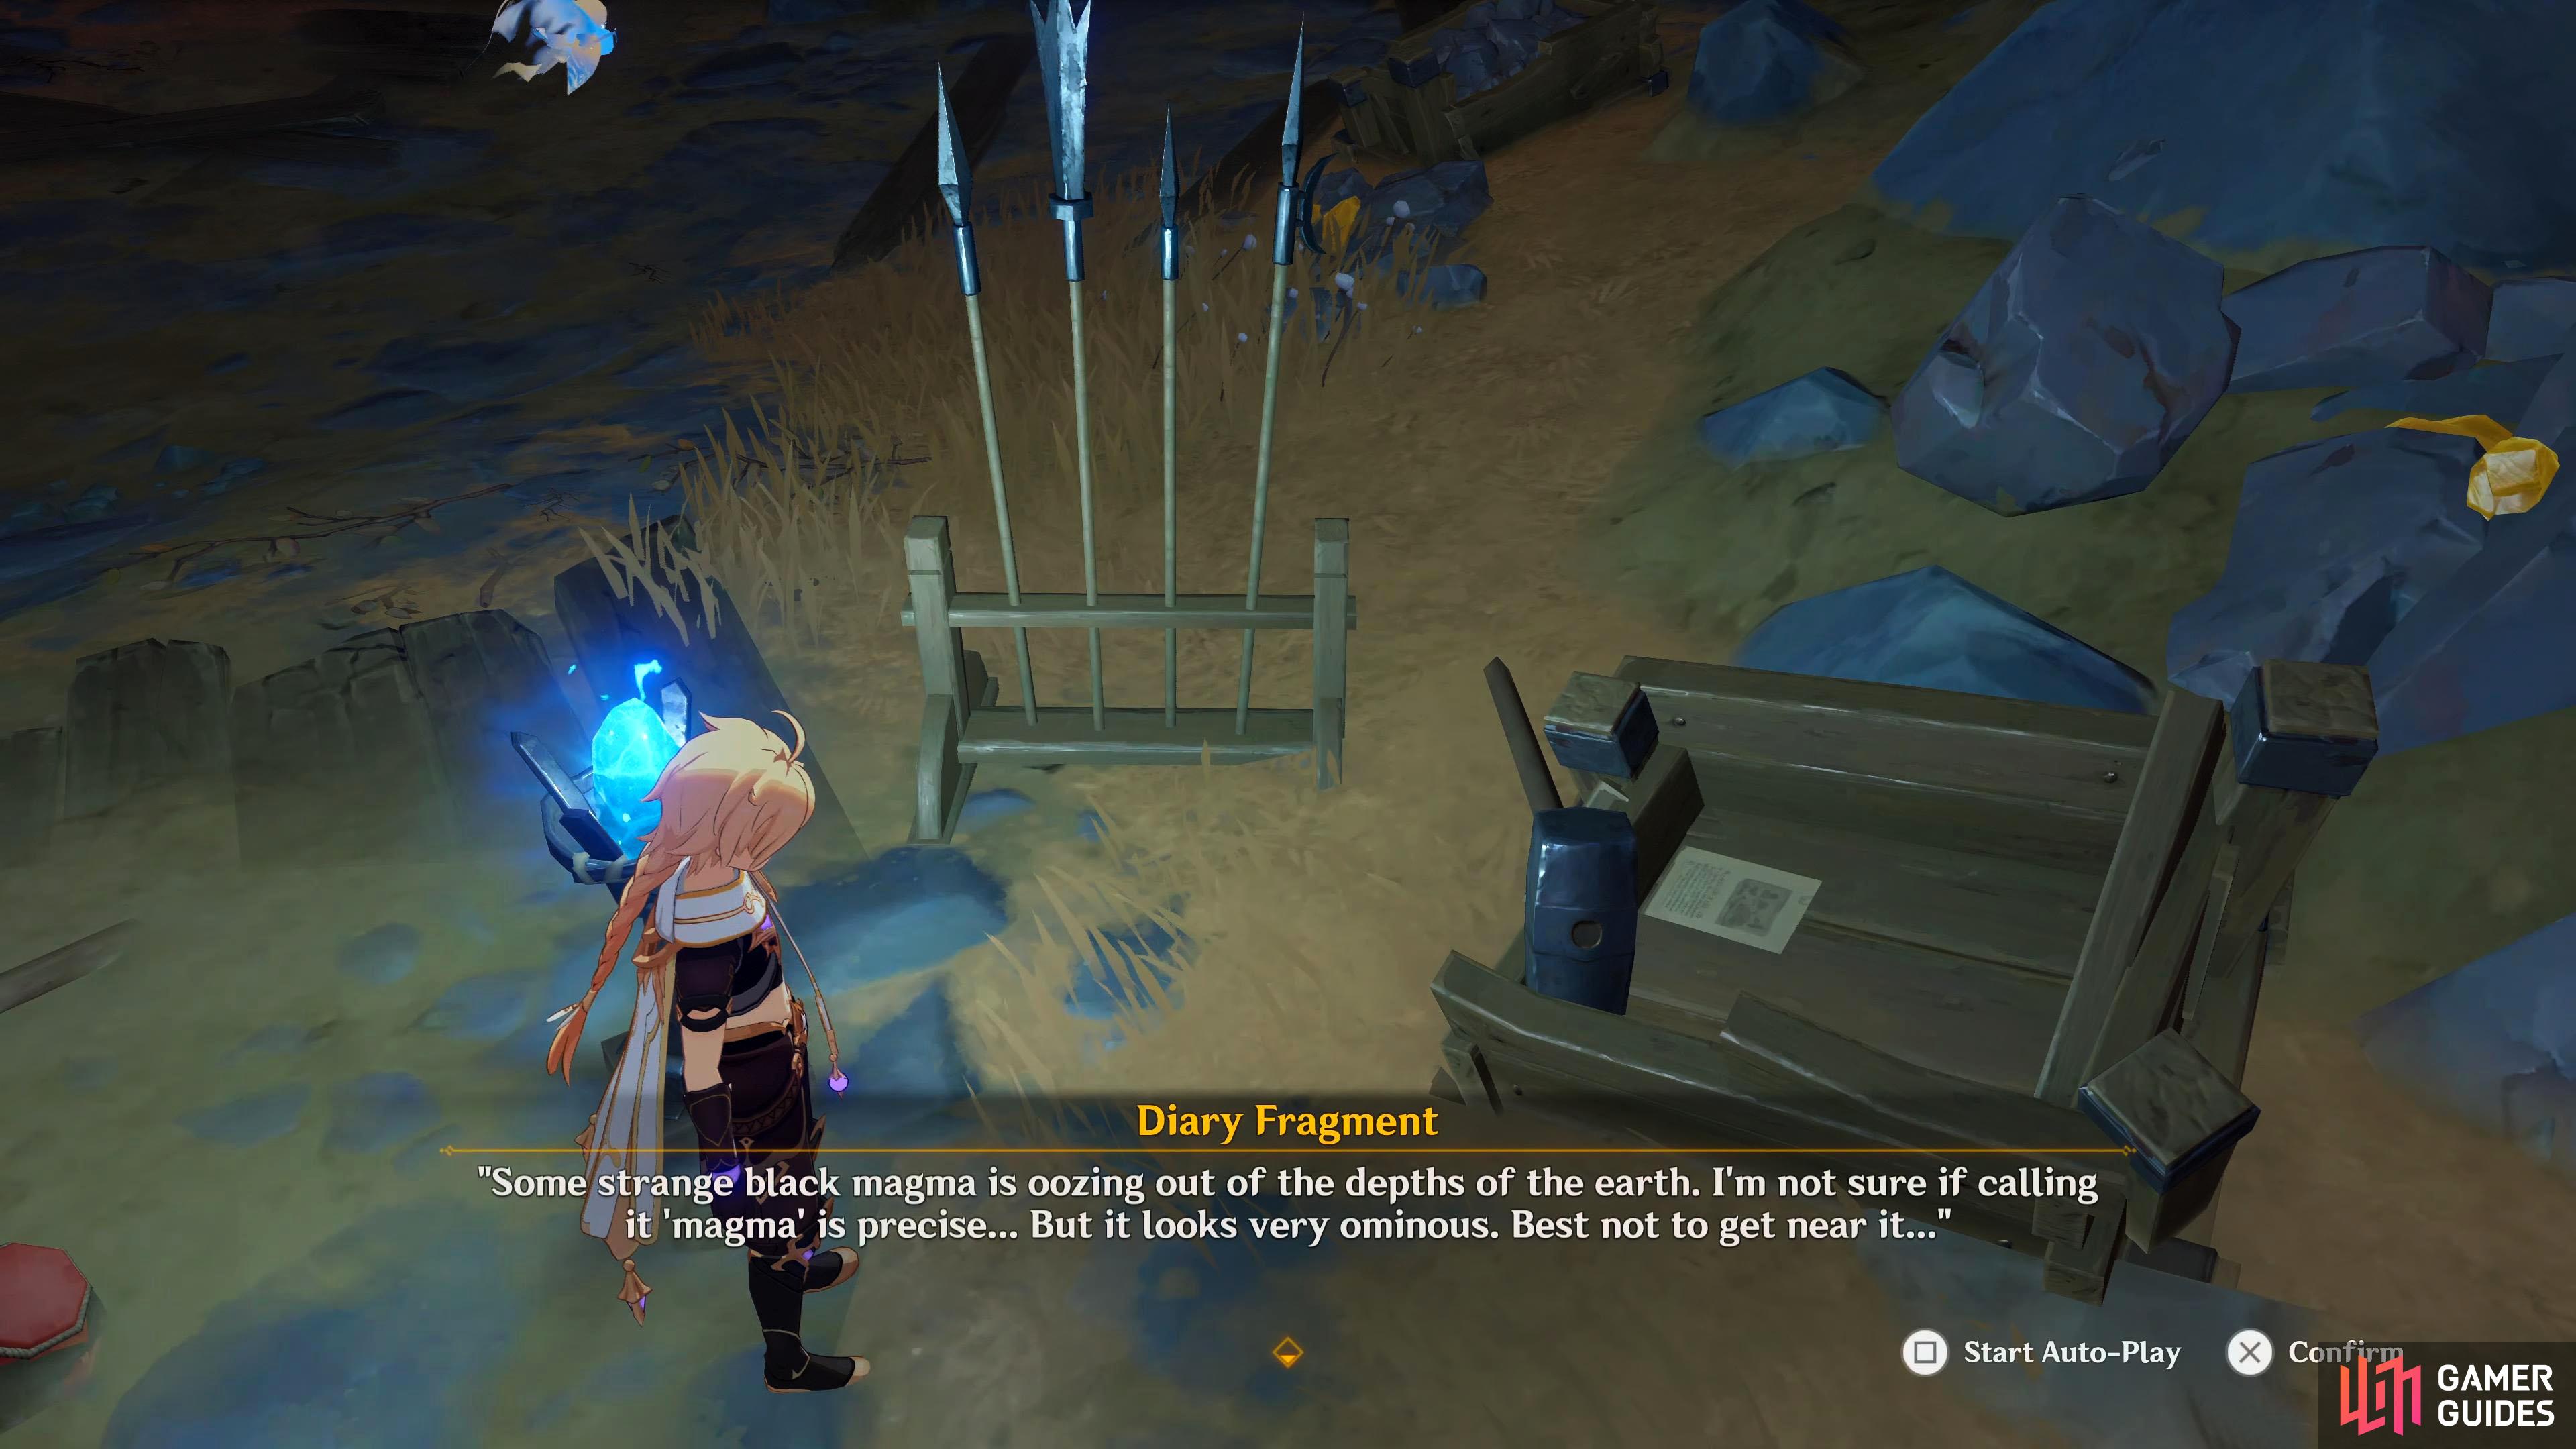 The last Diary Fragment can be found in a broken crate near the Treasure Hoarders white tent.